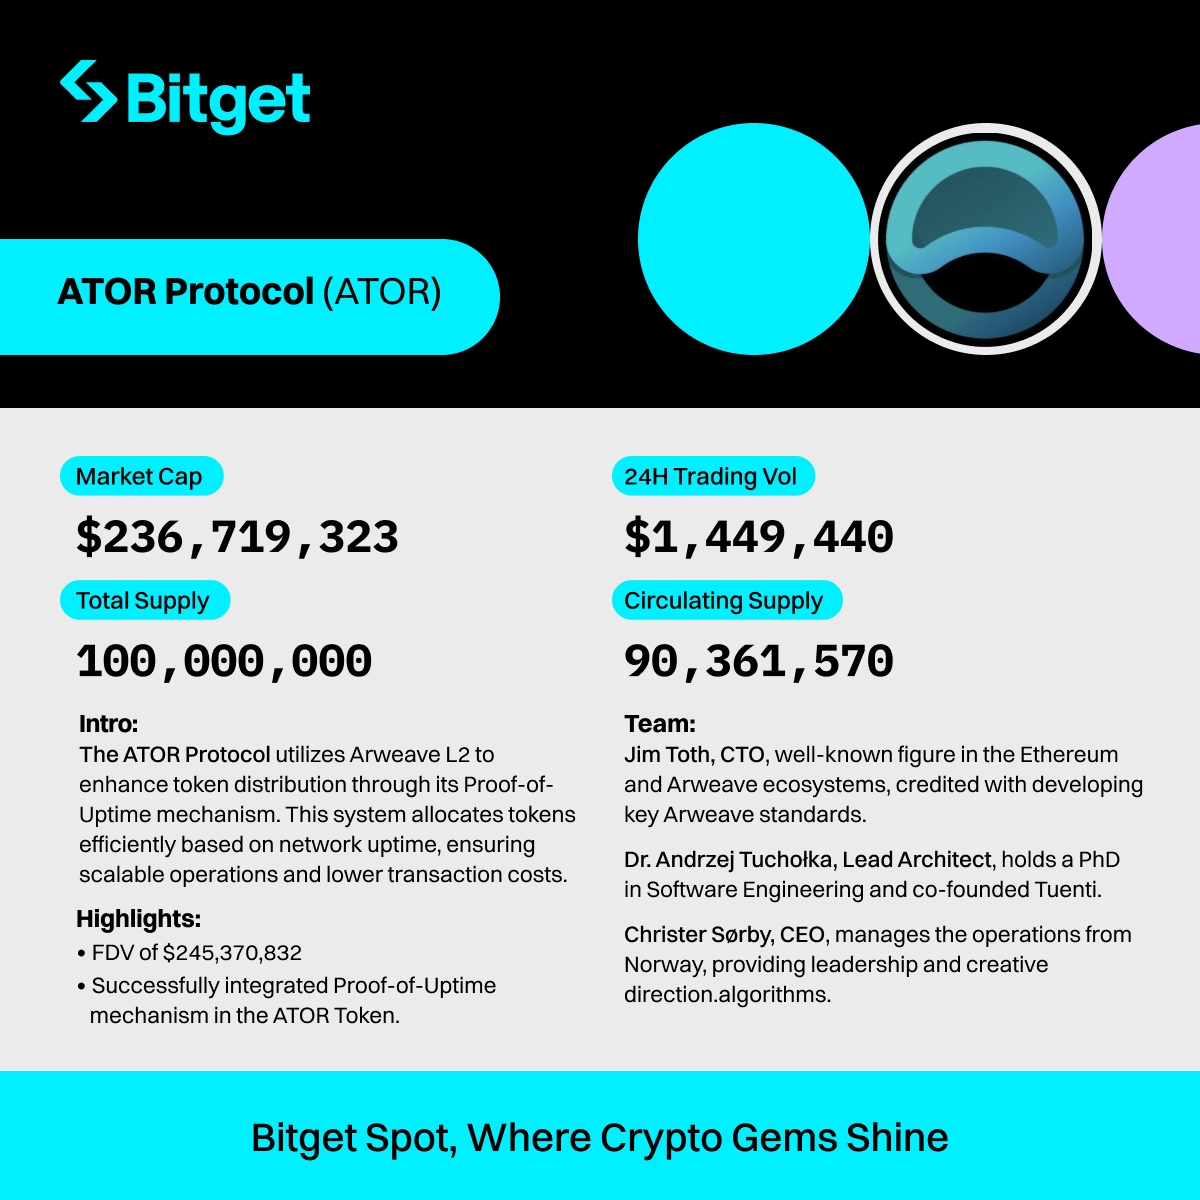 📢 $ATOR trading is now LIVE on #BitgetSpot. @atorprotocol 🔥 Come and grab a share of 3,500 ATOR! 🚀 Trade now: bitget.com/spot/ATORUSDT Find out more about $ATOR ⤵️ #ATORlistBitget